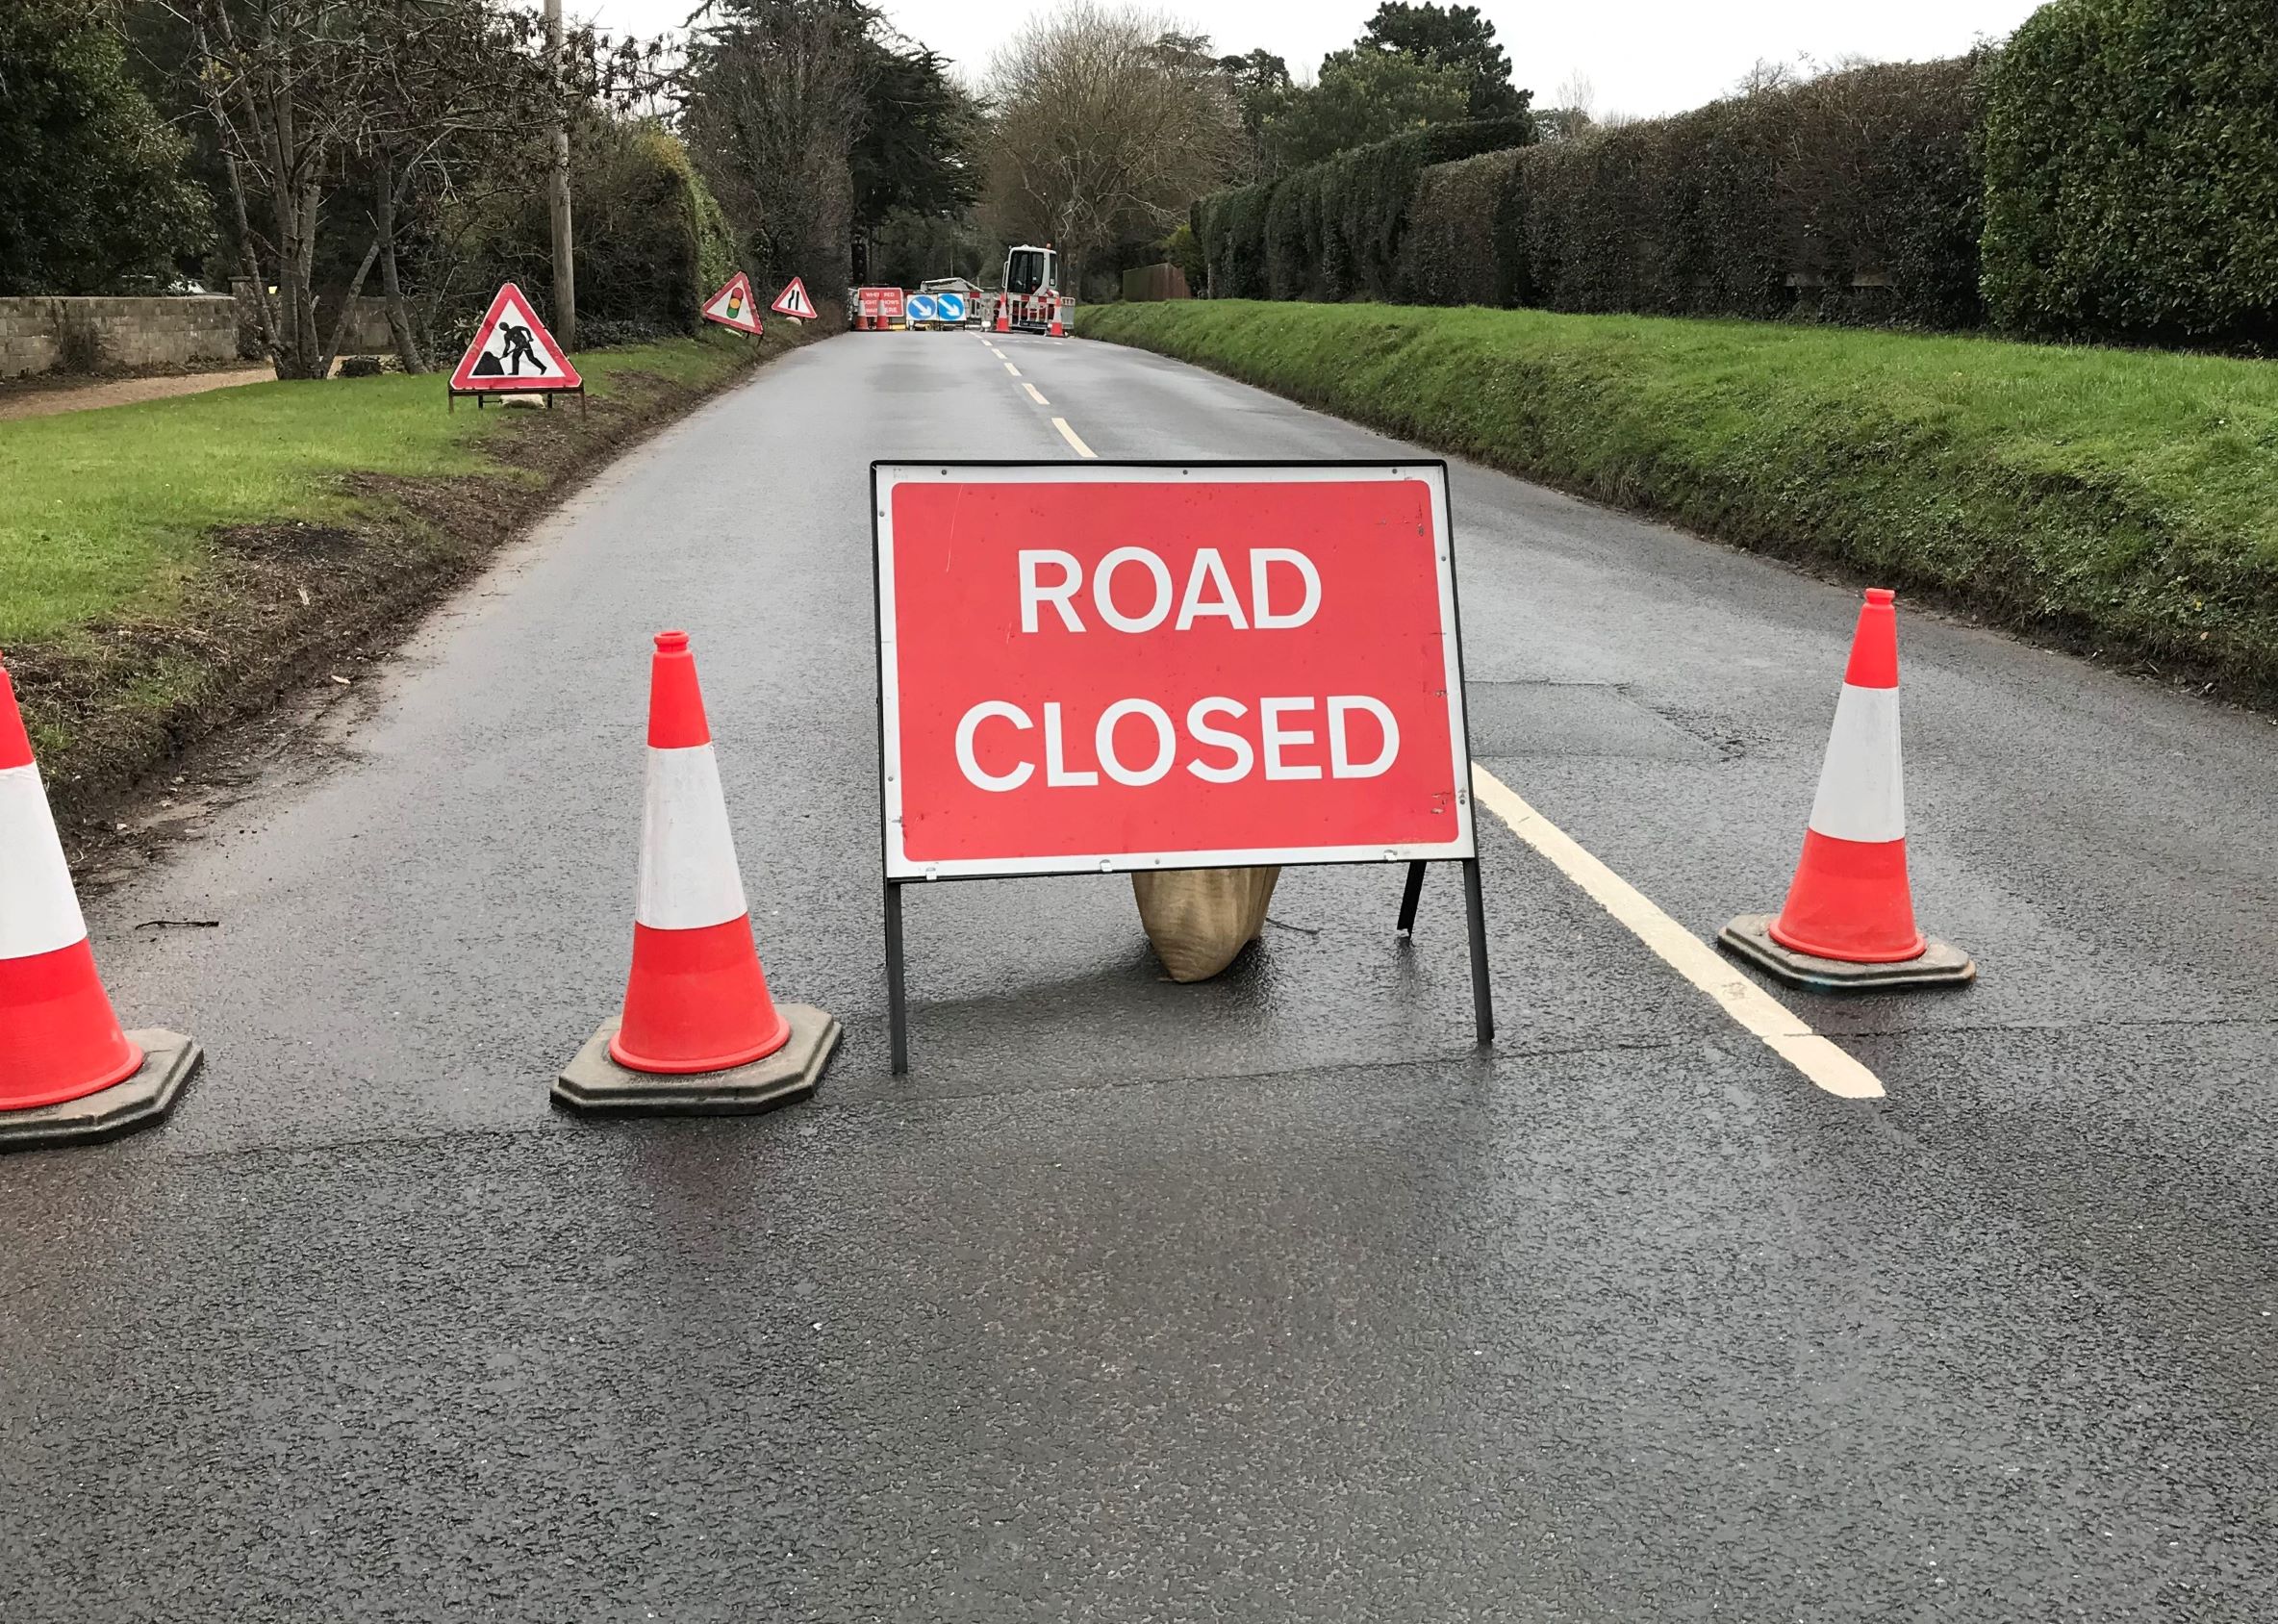 Photo showing road closed sign and traffic cones in the foreground and works equipment and machinery in the background in the middle of the road.